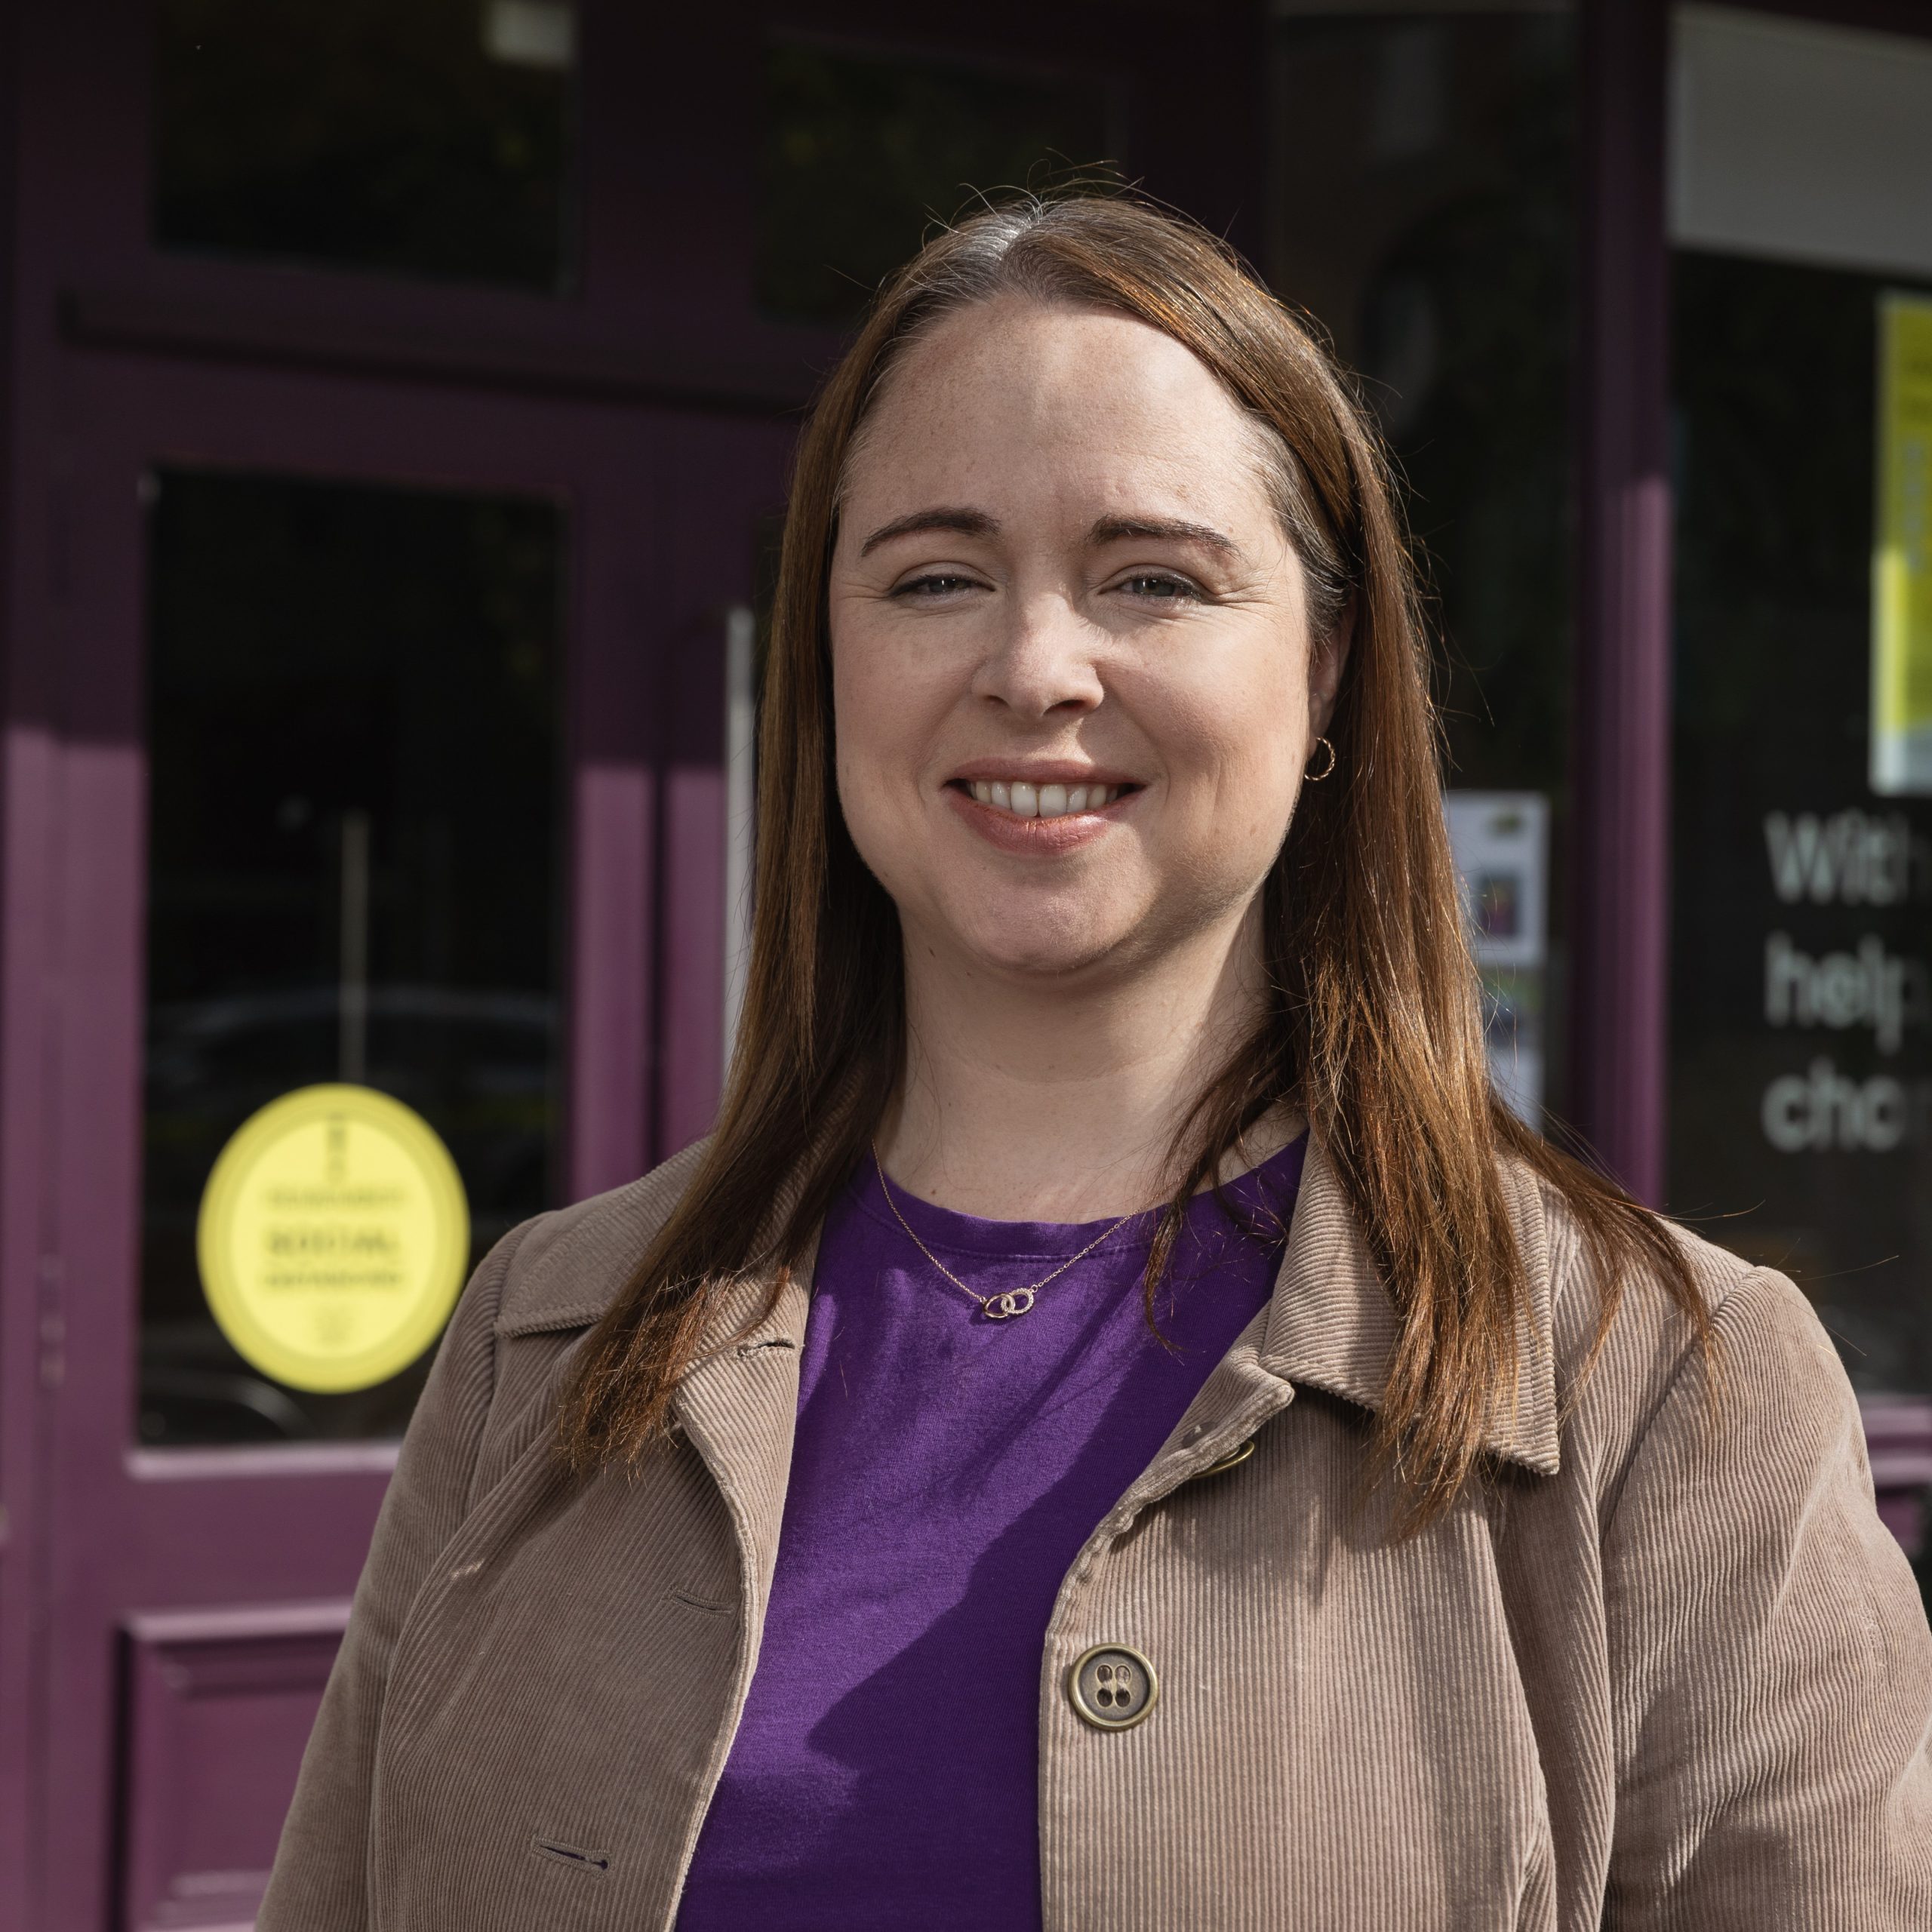 A Focus Ireland customer smiles to camera. She is wearing a brown corduroy jacket and a purple t shirt.